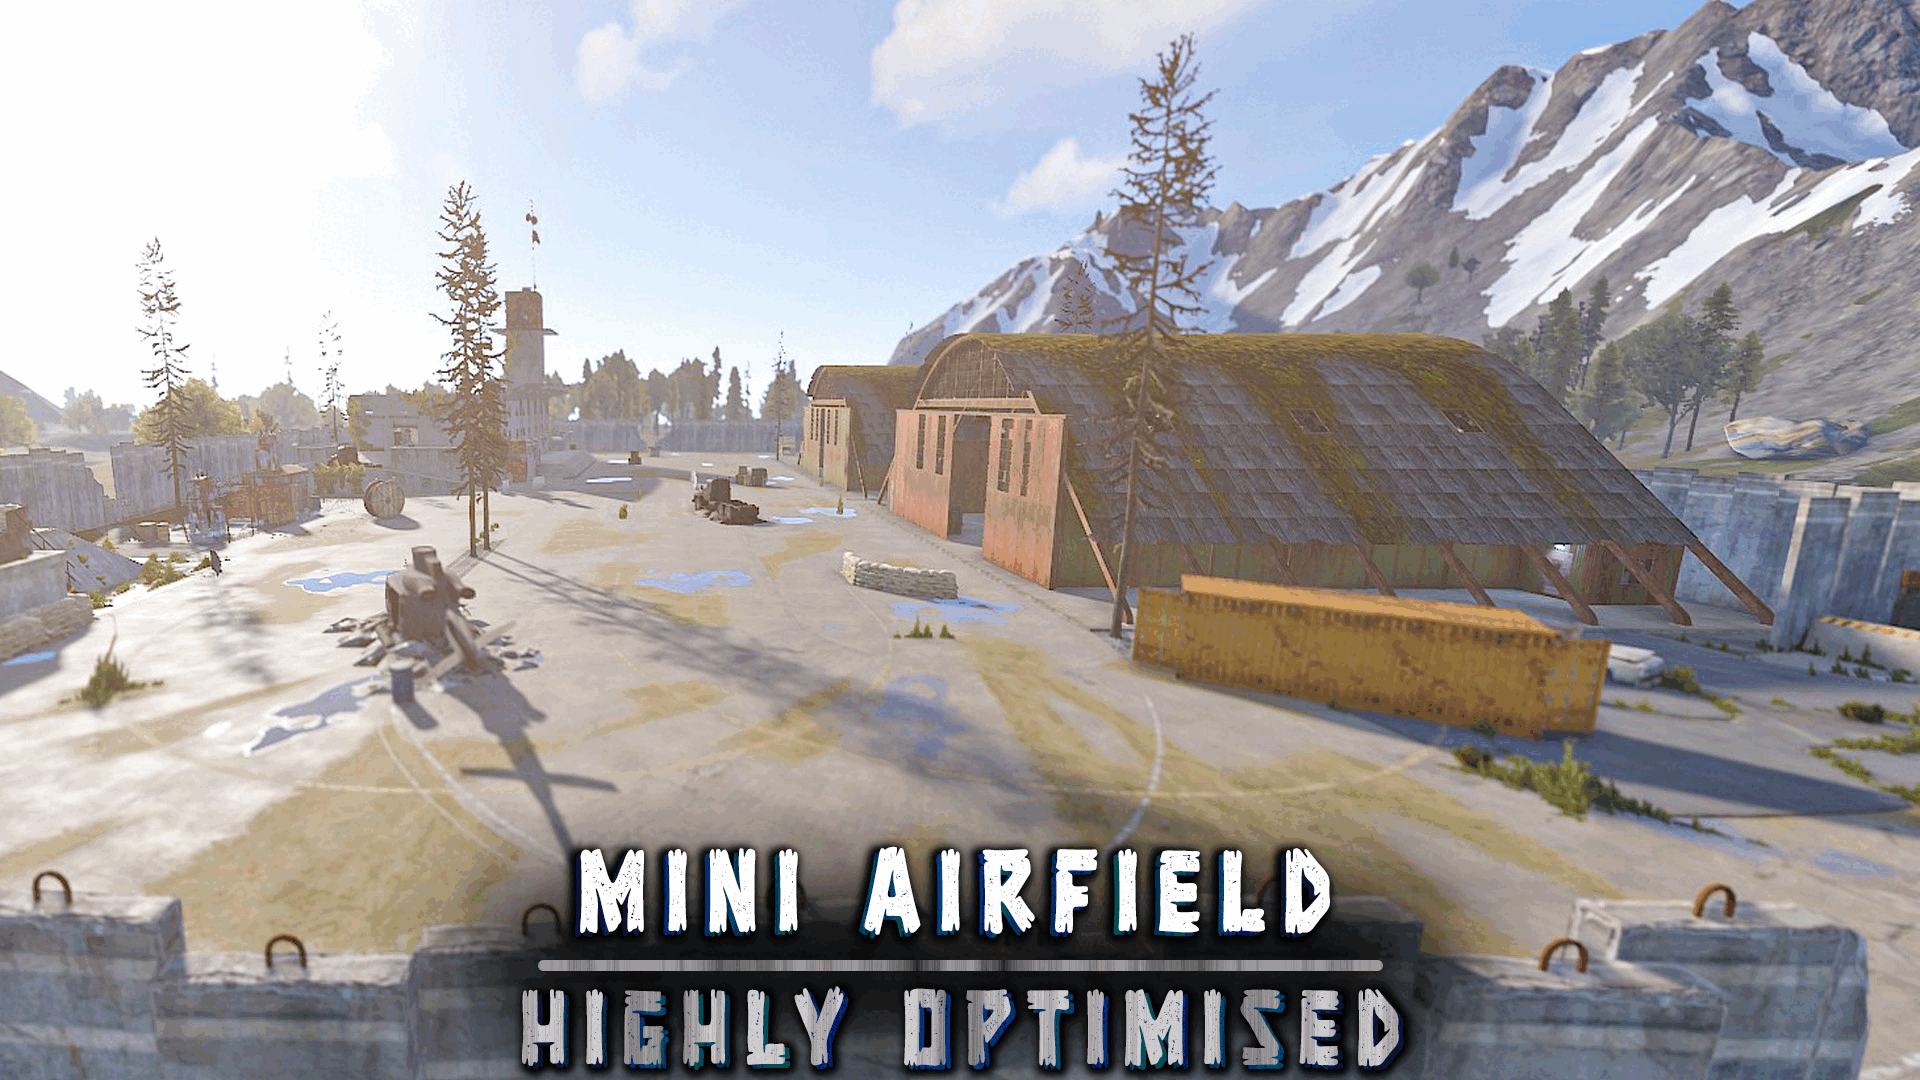 More information about "Mini Airfield by Answer"